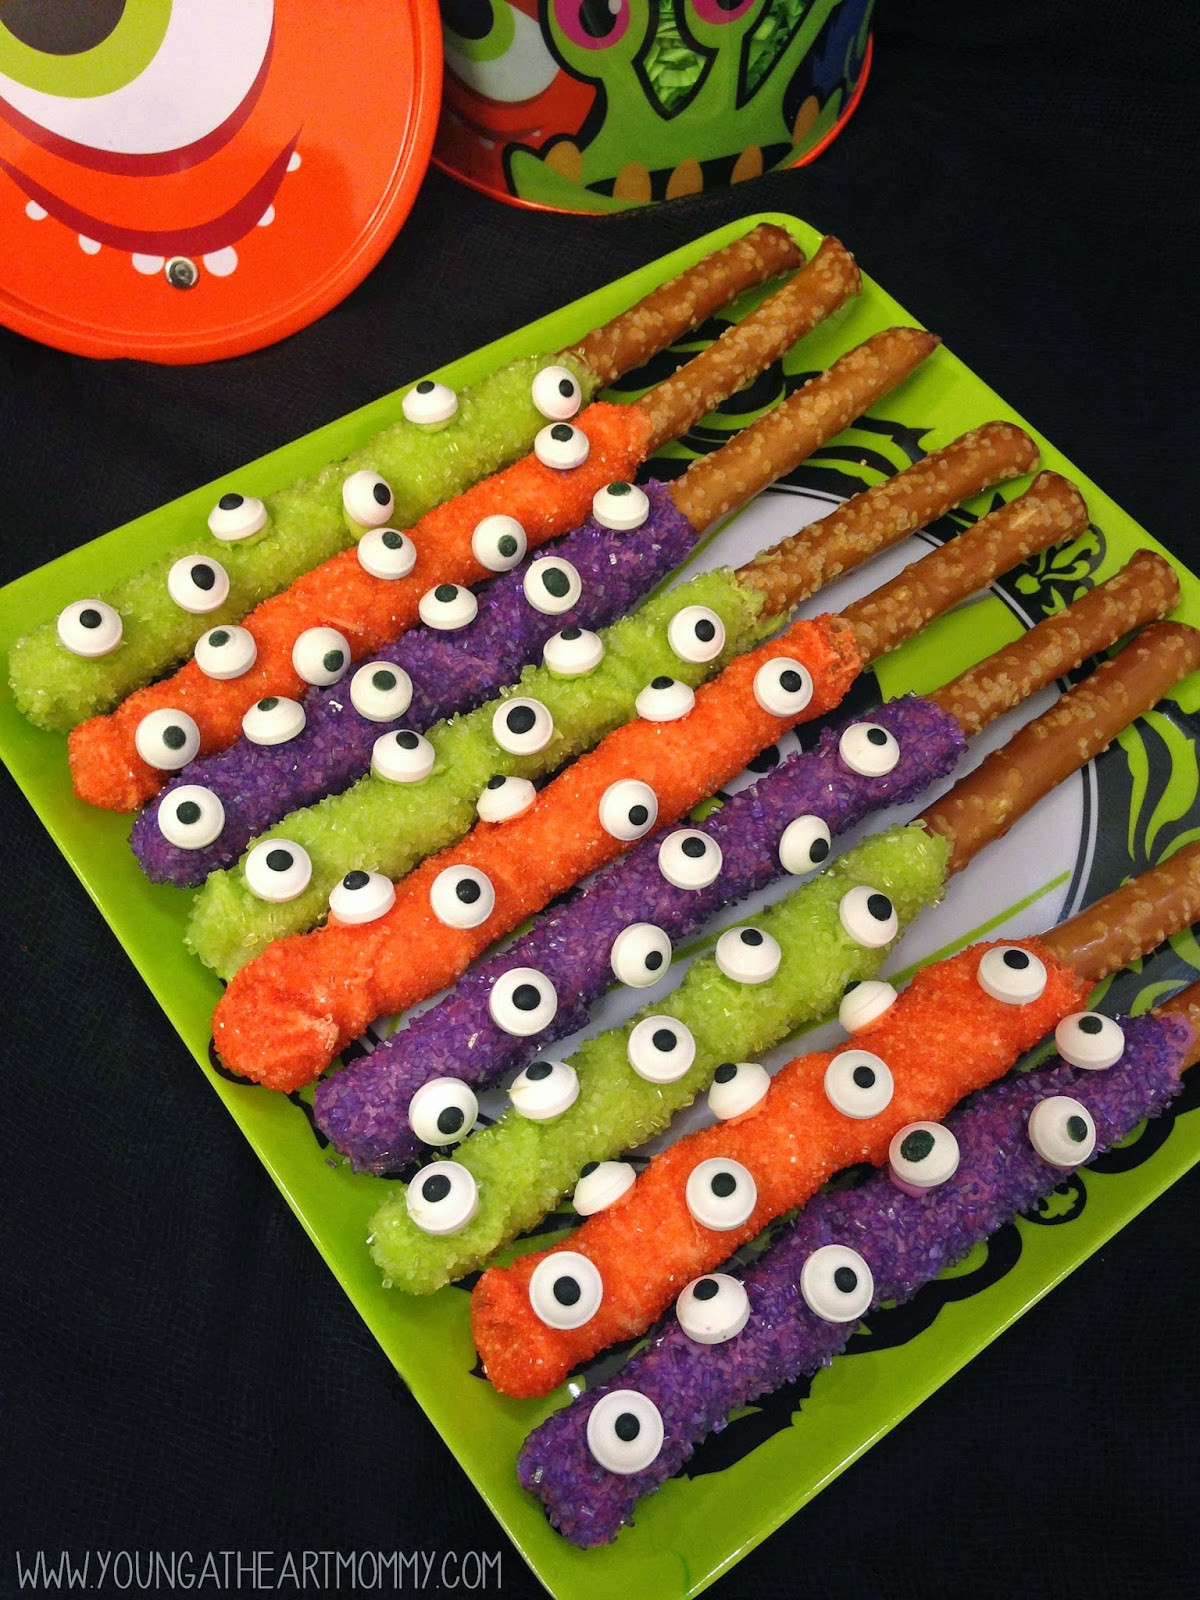 Halloween Chocolate Covered Pretzels
 Eerie Eyeball Pretzel Rods Young At Heart Mommy